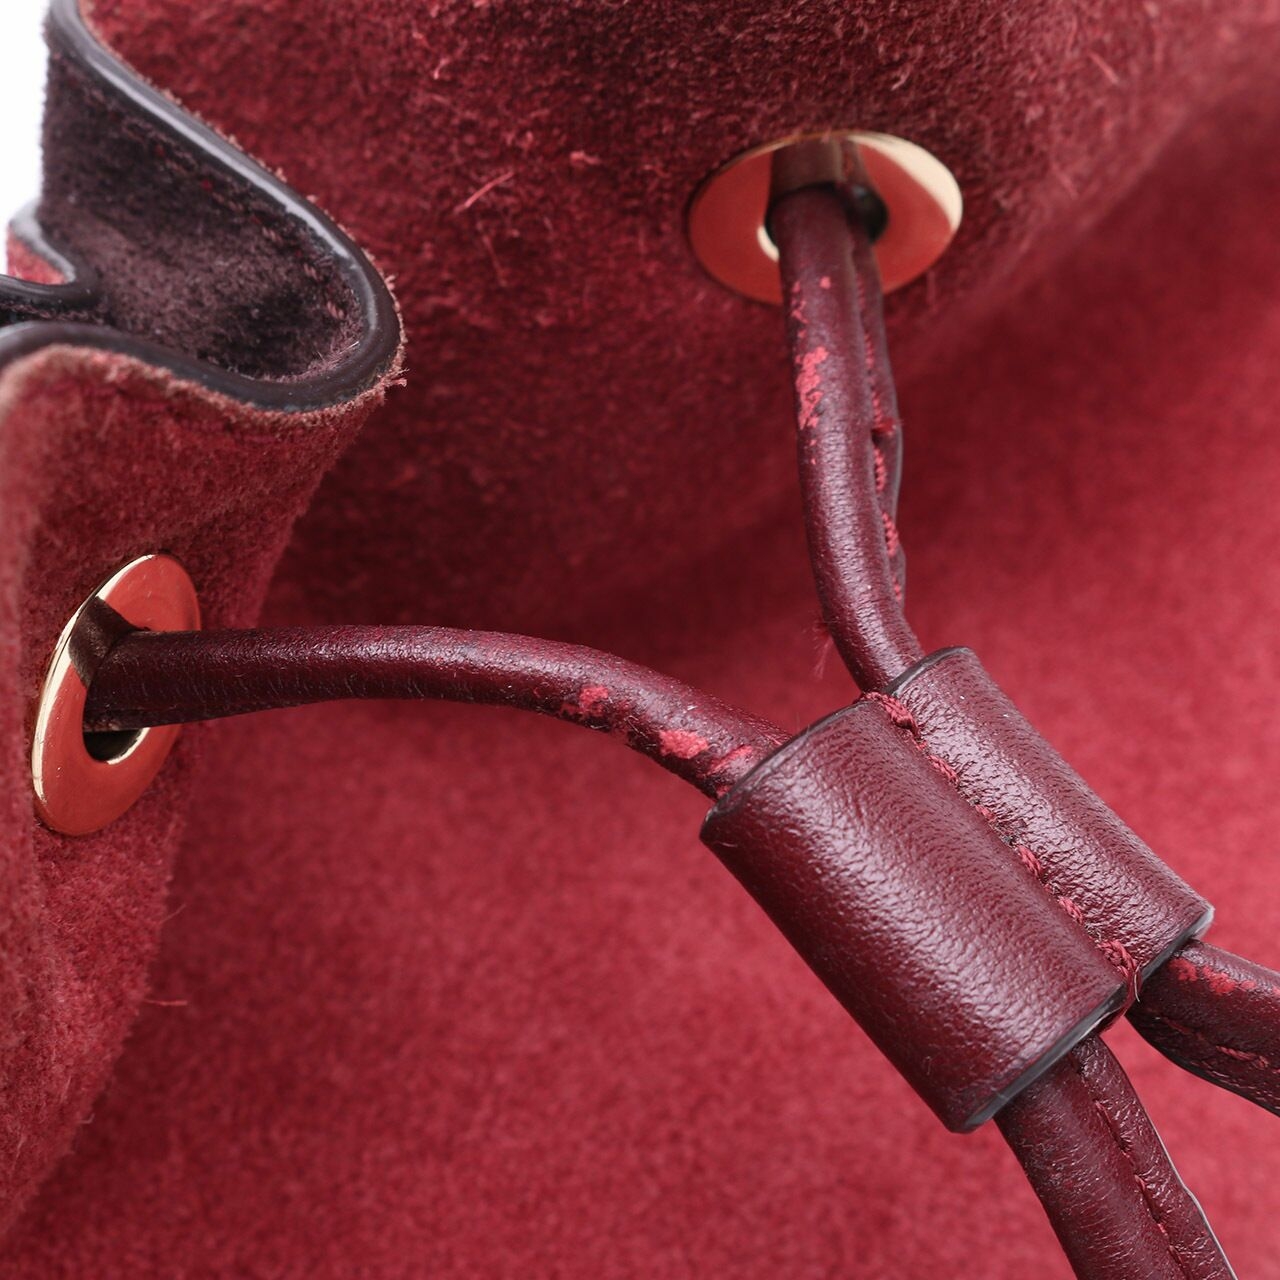 Michael Kors Cary Medium Maroon Suede and Leather Bucket Bag